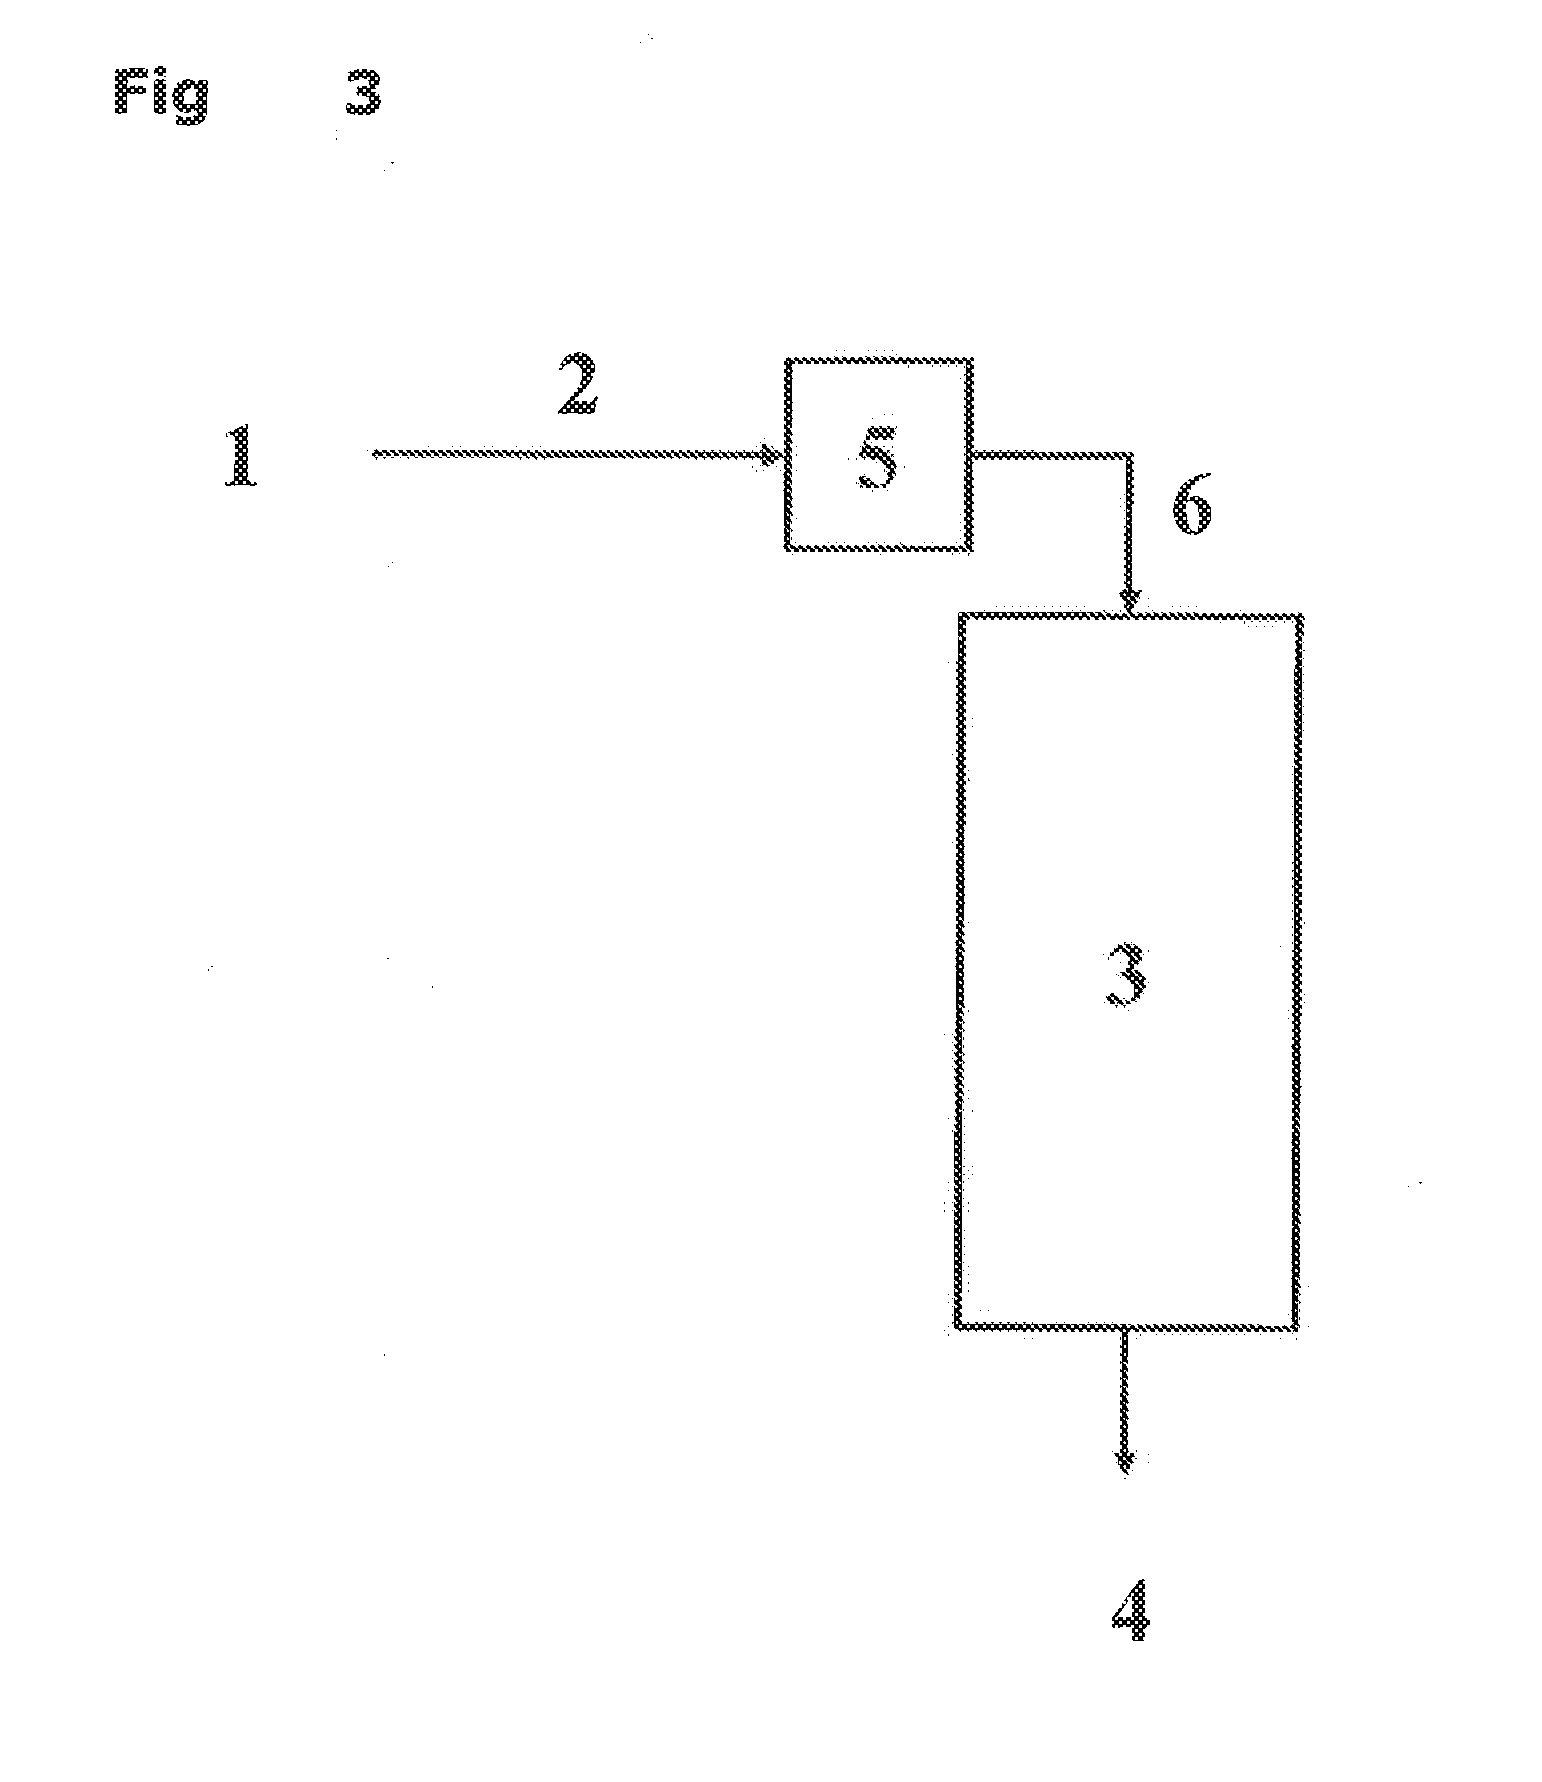 Shaping capture masses for the purification of a liquid or gas feed containing heavy metals